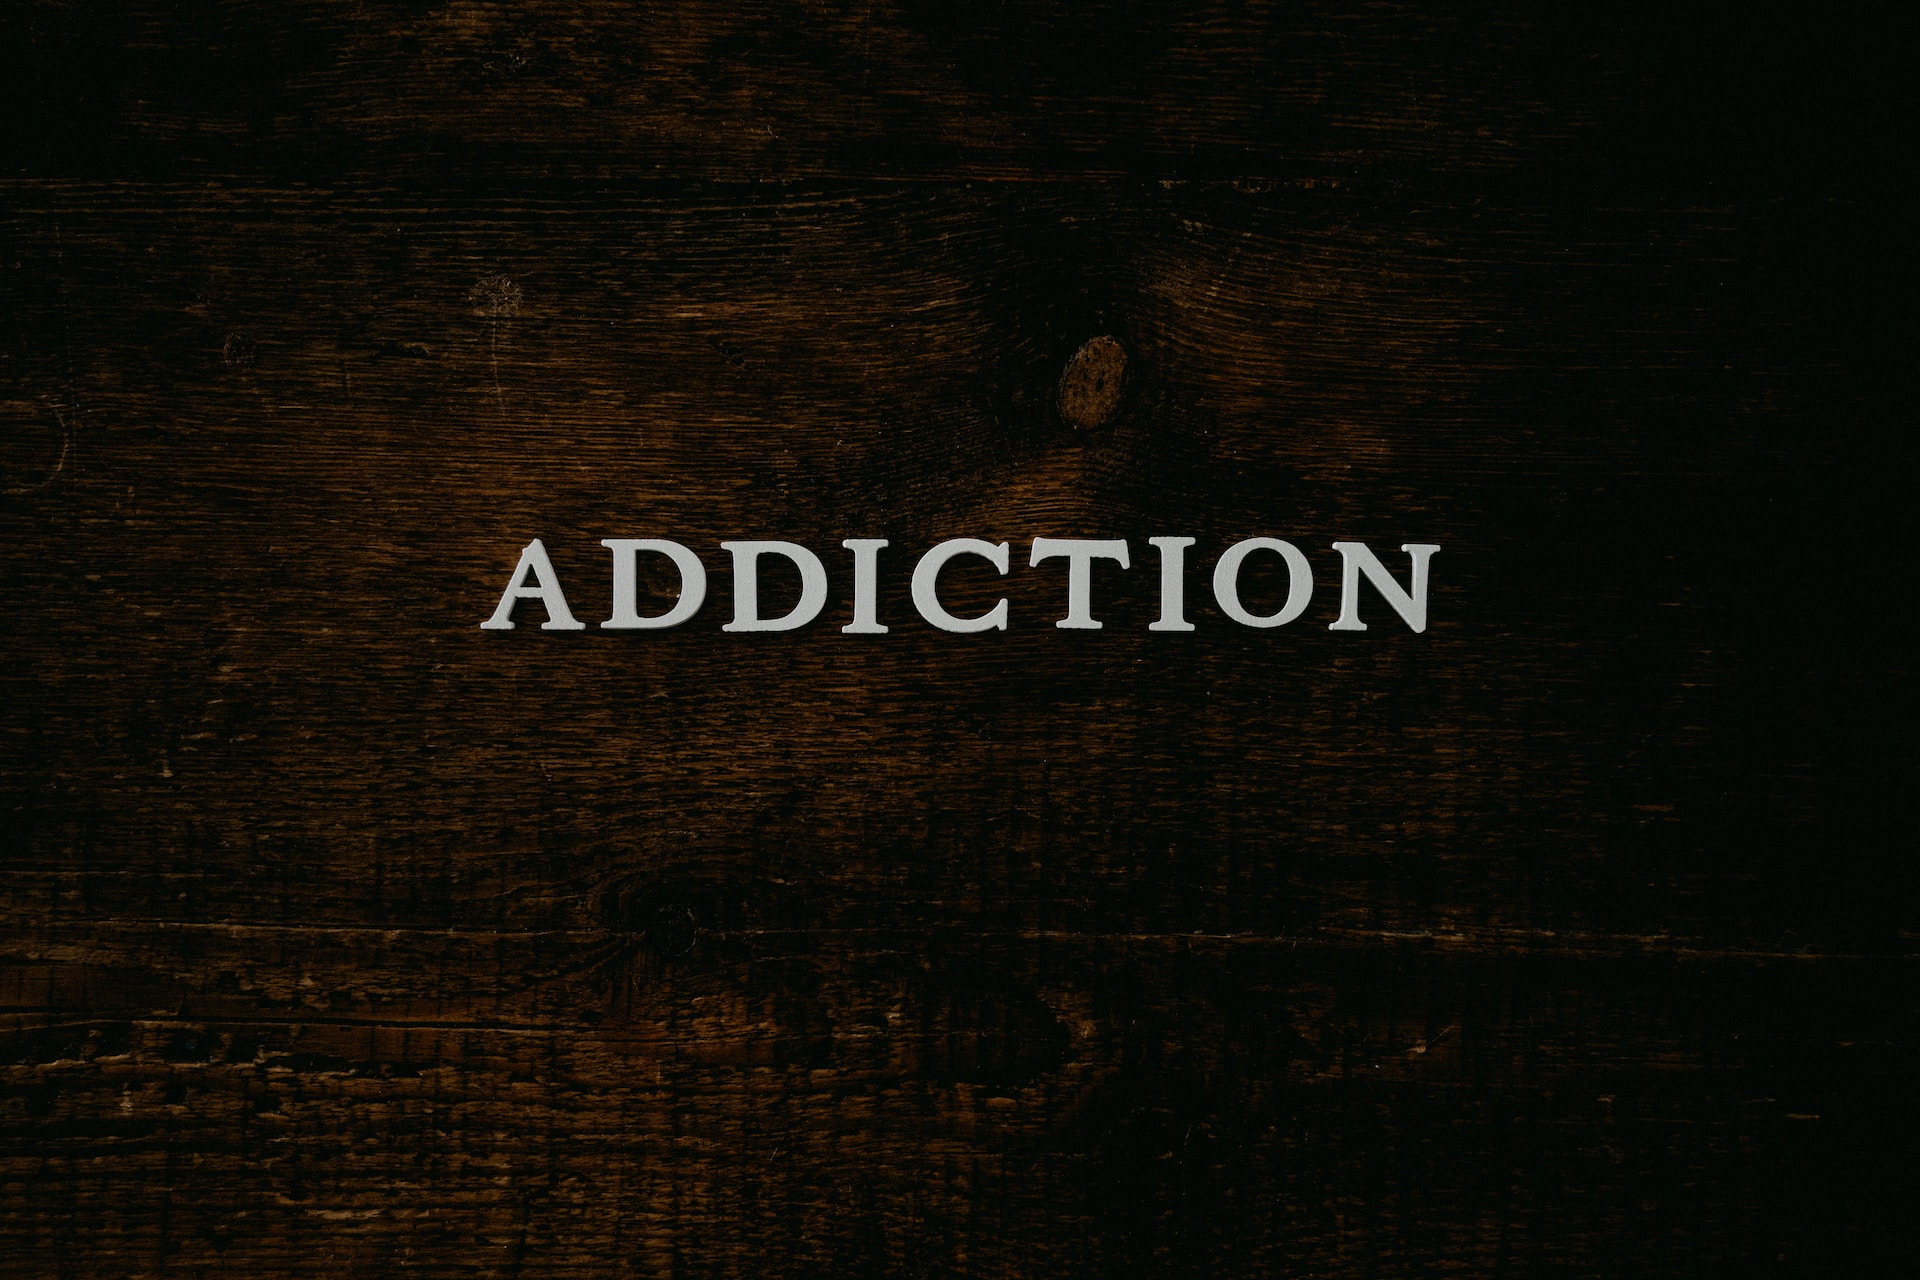 Key Ways To Help A Loved One With An Addiction